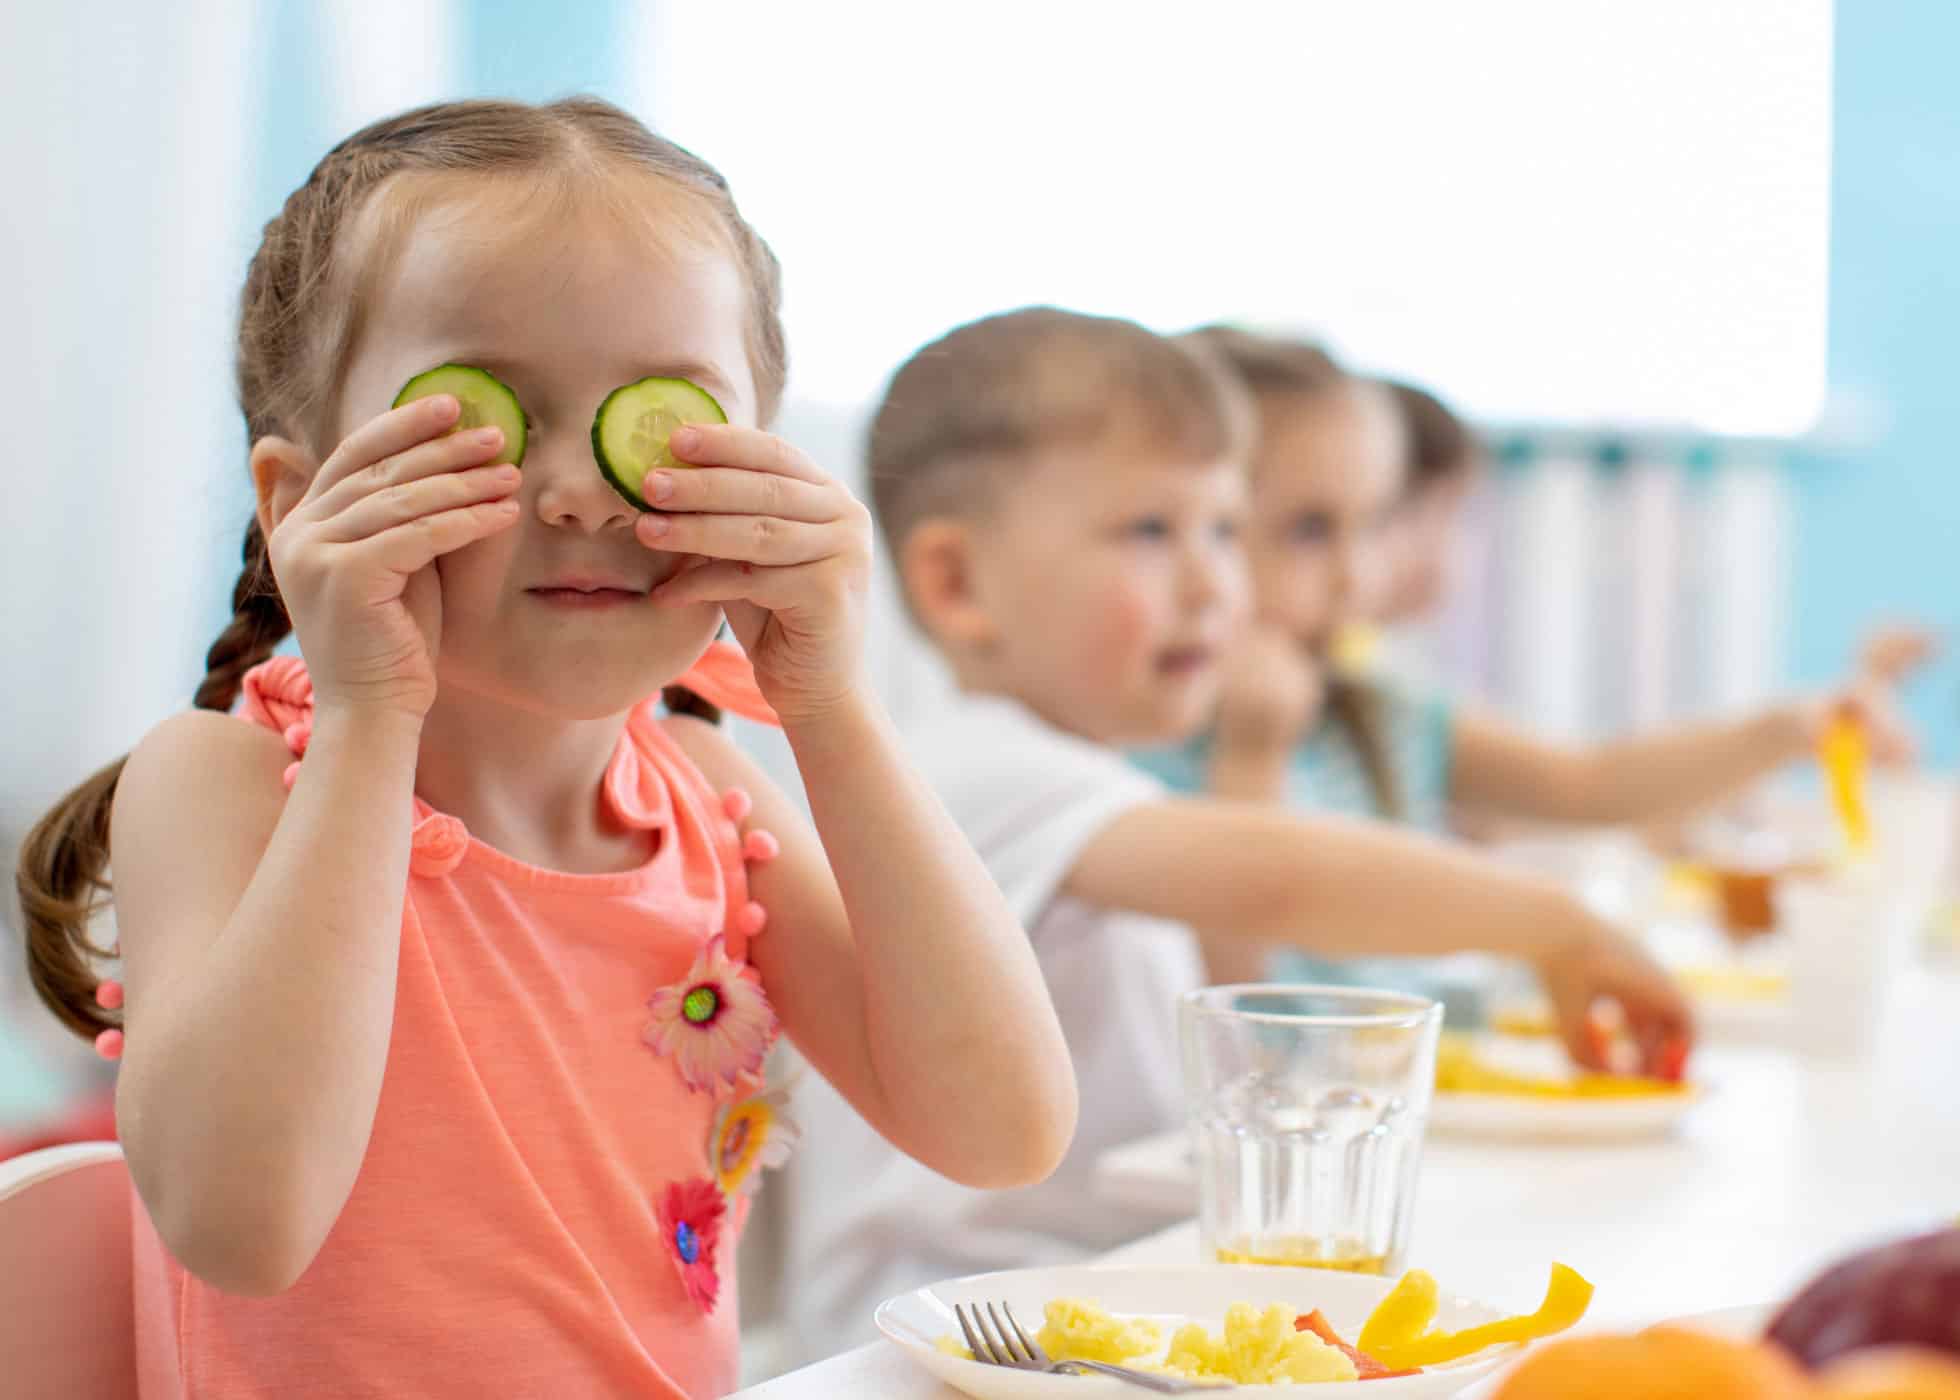 Child holding cucumbers eating healthy